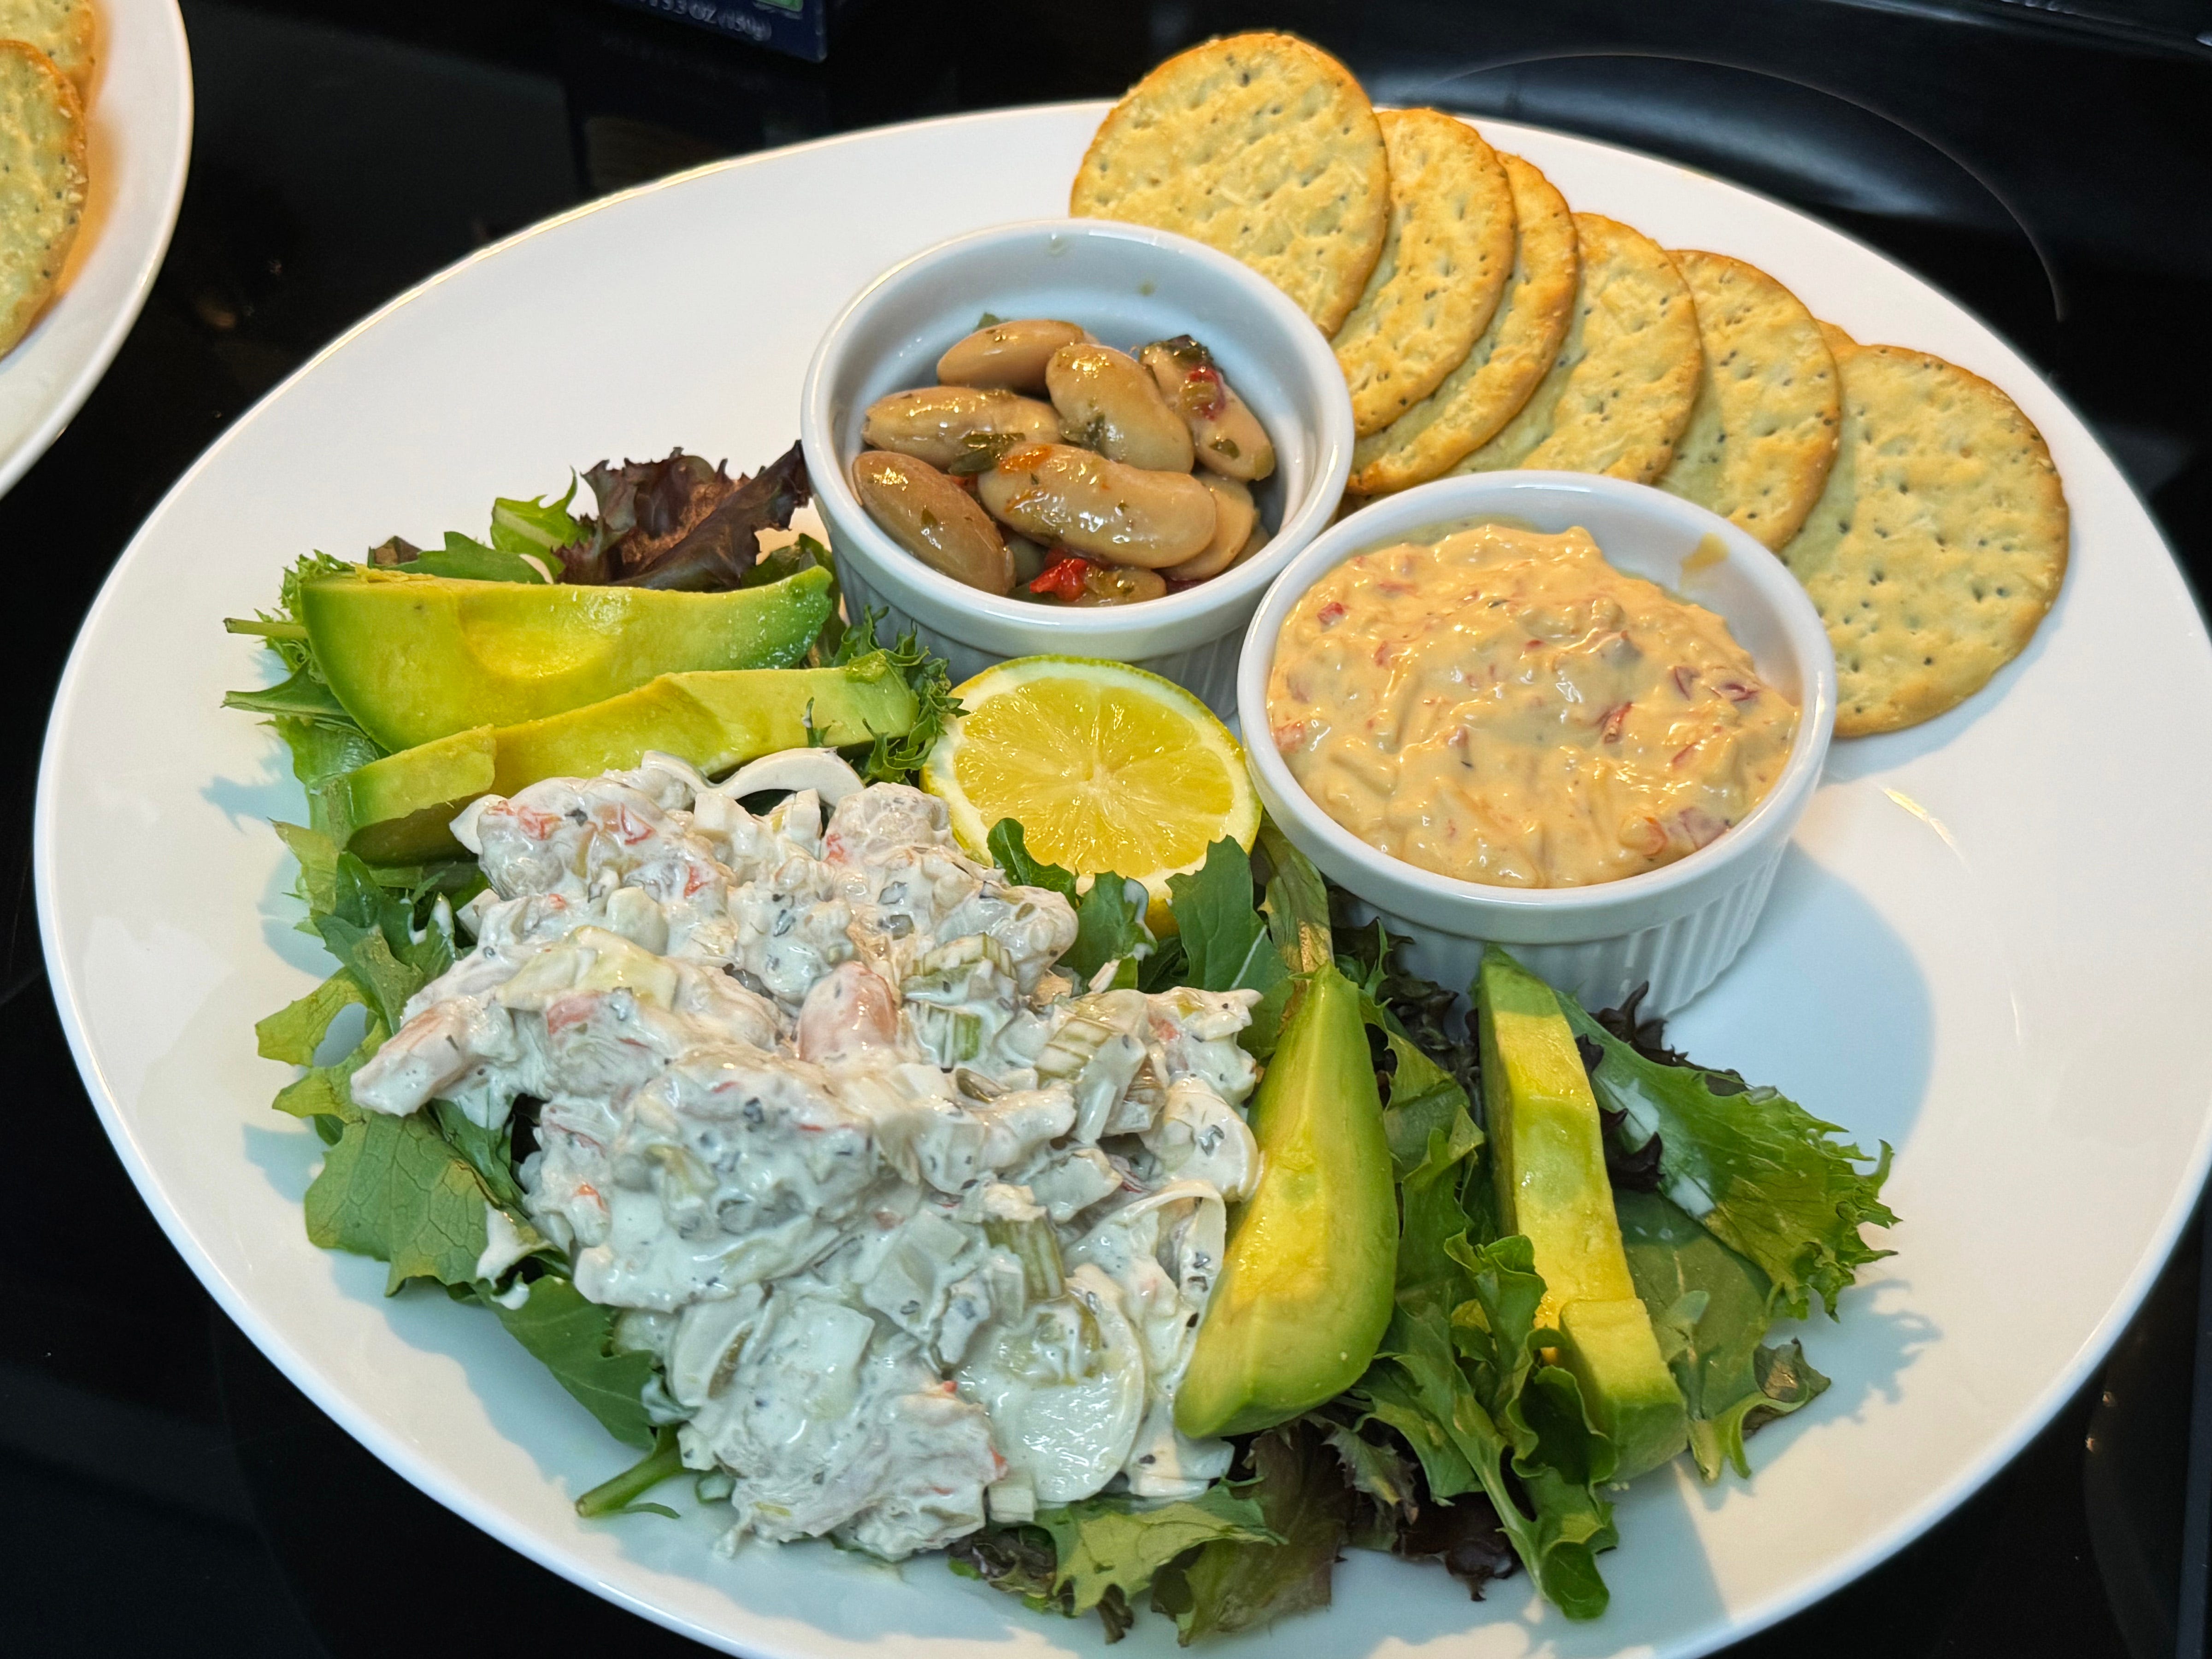 Gigante beans, shrimp salad, lemon and pimento cheese (plated) with a spring mix and sliced avocado. The beans, shrimp, cheese and lemon was part of our haul from Paradise Seafood & Gourmet Market, Marco Island.